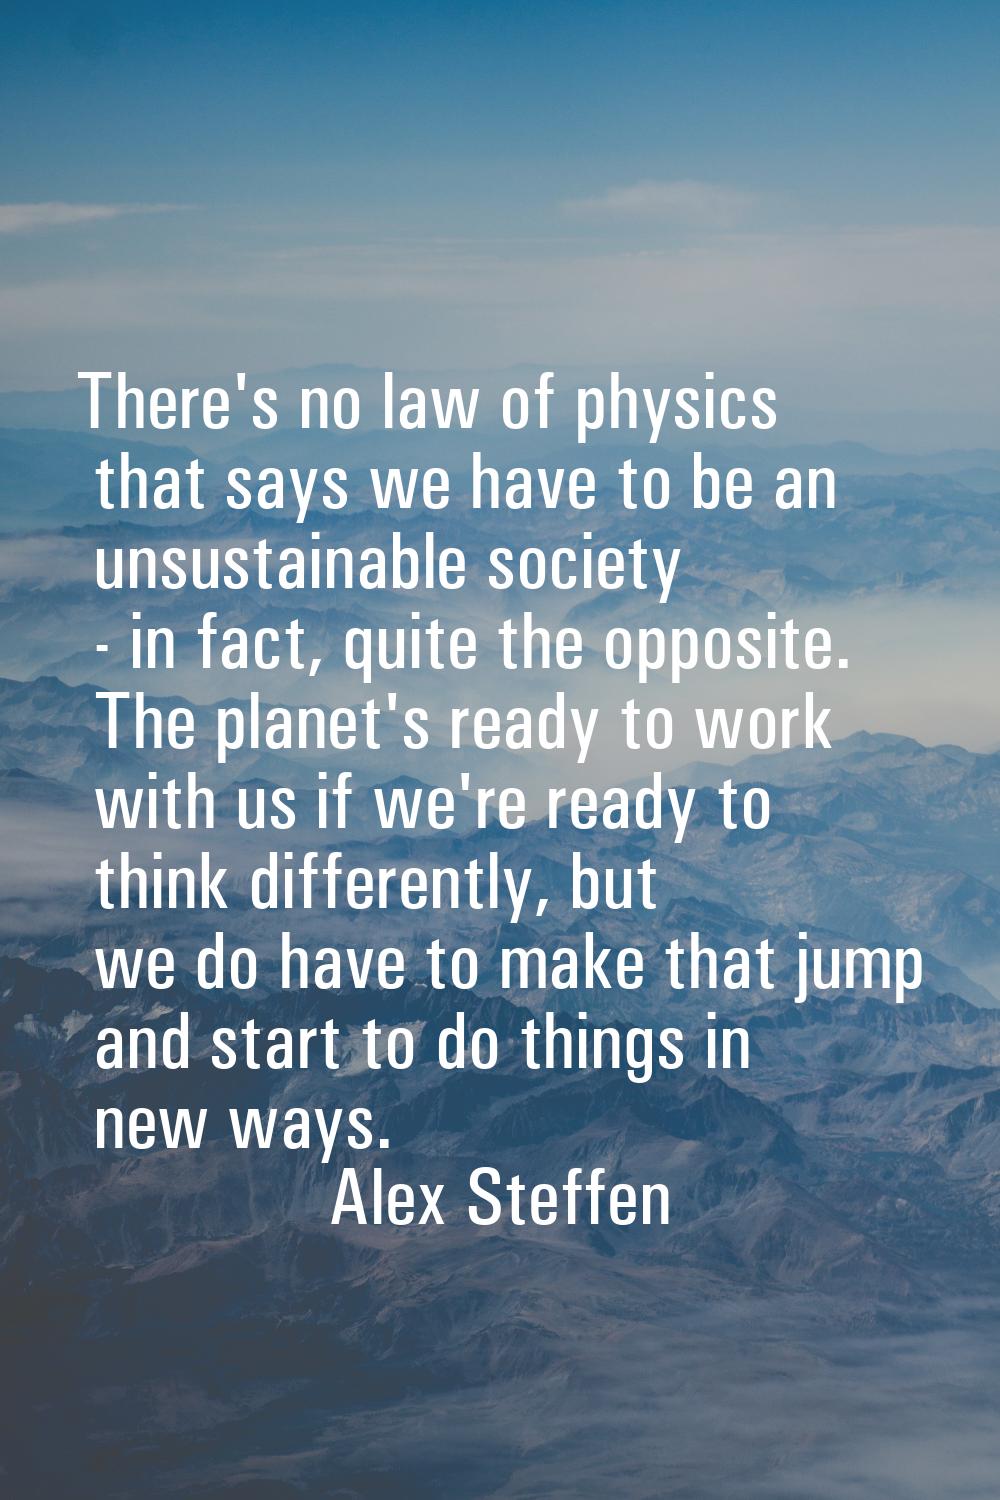 There's no law of physics that says we have to be an unsustainable society - in fact, quite the opp